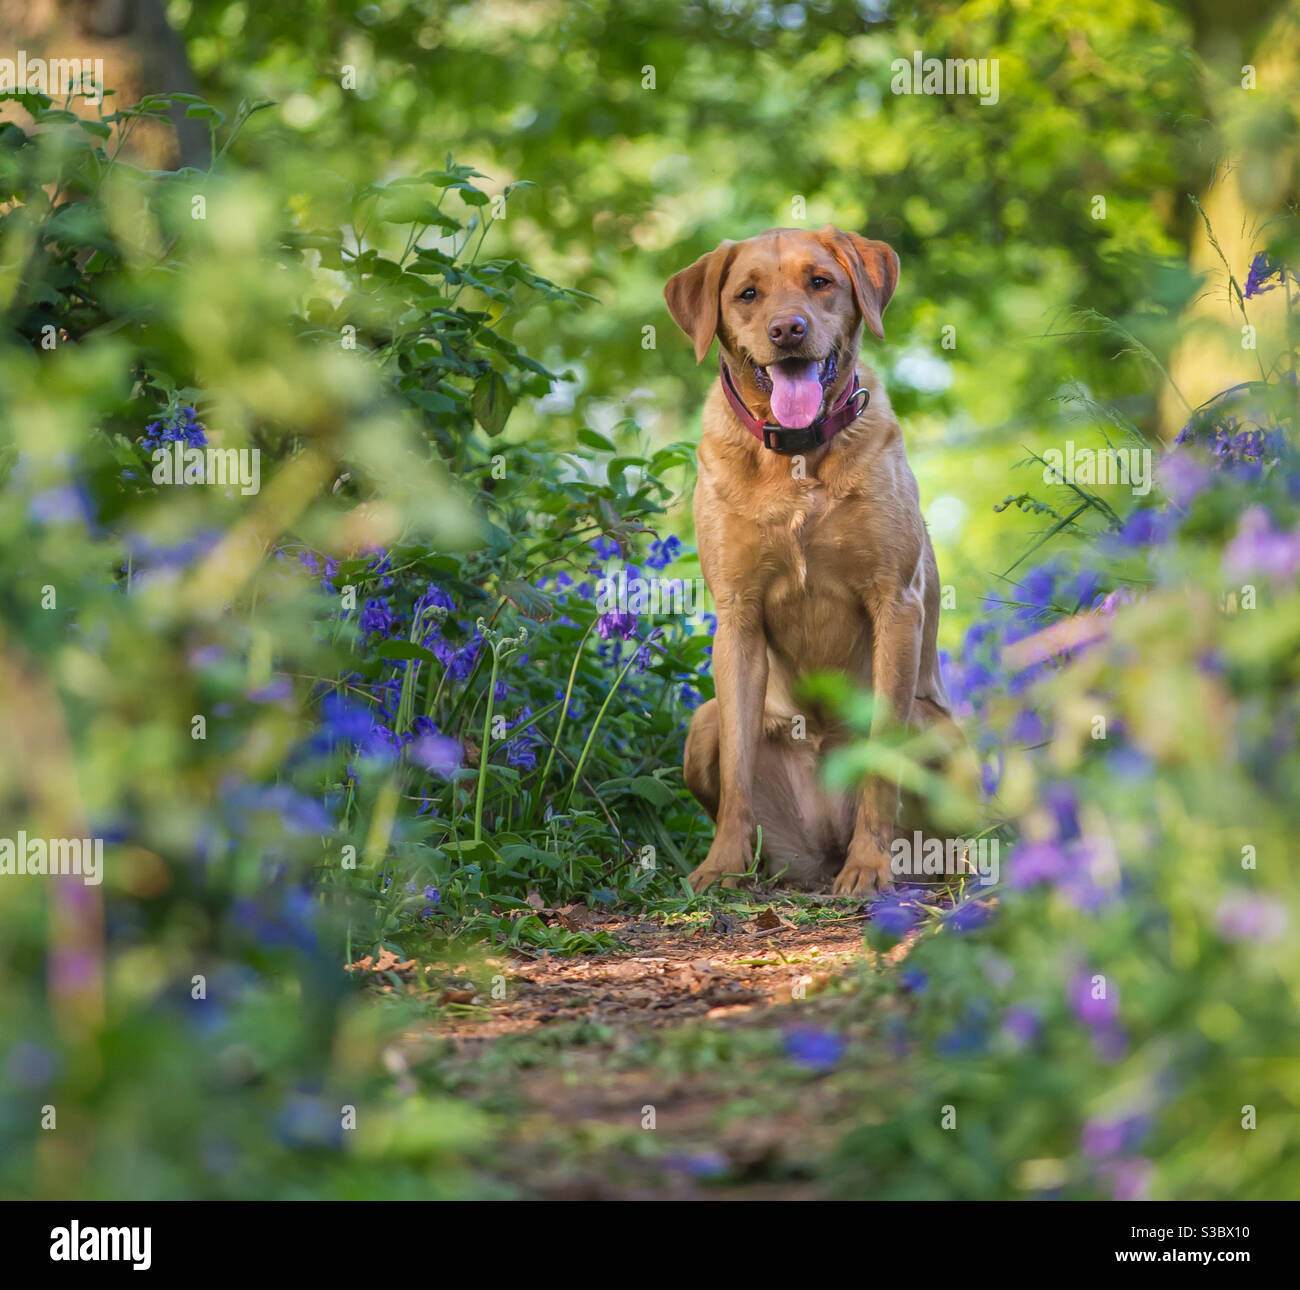 A cute yellow labrador retriever dog sitting in woodland amongst bluebells and flowers Stock Photo